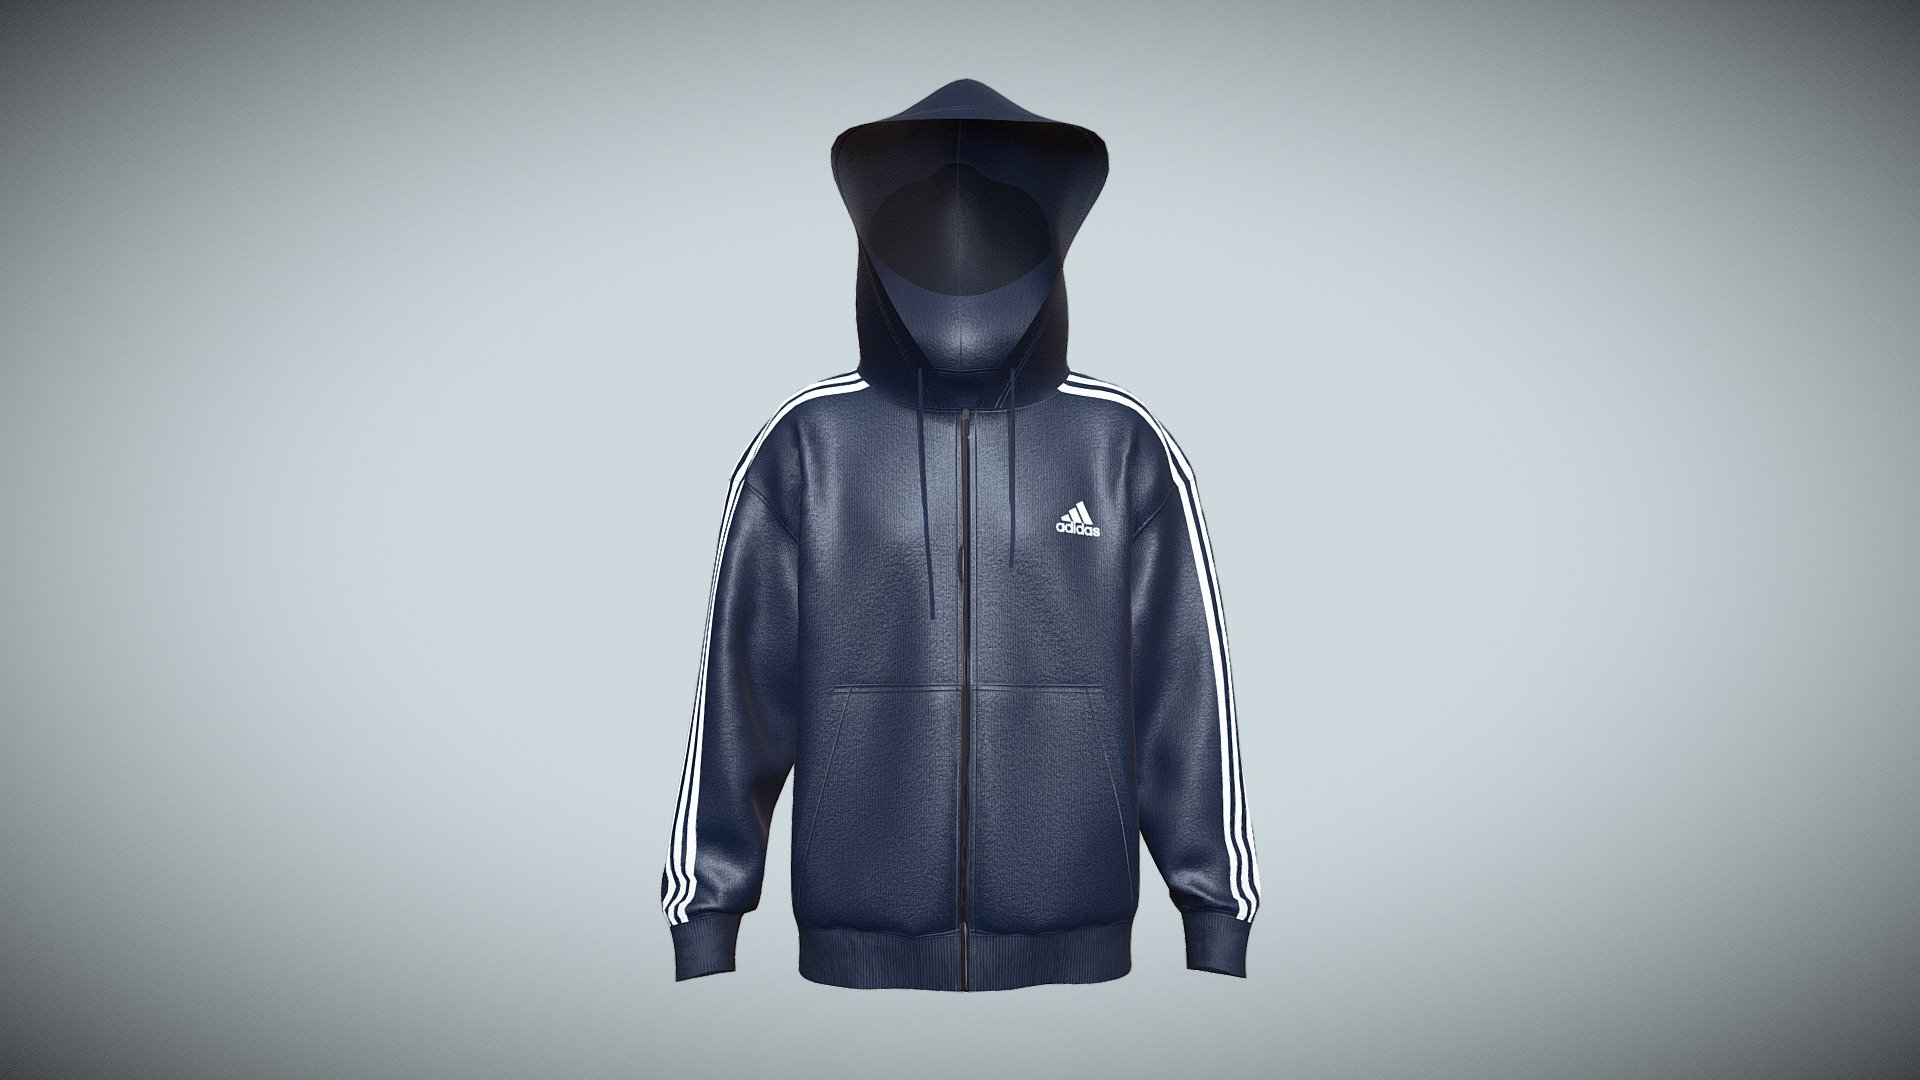 Adidas Essentials Fleece 3-Stripe Zip Hoodie

I am a Professional 3D Fashion/Apprel Designer. I have 7 years working experience about 3D Fashion. I am working with Clo3d, Marvelous Designer (MD), Daz3d, Blender, Cinema4d, Etc.

Features:
1.  2k UV Texture
2.  Triangle mesh
3.  Textures with Non-overlapping UV Map (2048x2048 Pixels)
4.  In additonal Textures folder have diffuse,displacement,metalness,normal,opacity,roughness maps.

Attachment Fils:
Exported Files (All are exported in DAZ Studio scale)
* OBJ
* FBX
* Marvelous Designer/Clo3d file (zprj)

Thanks 3d model